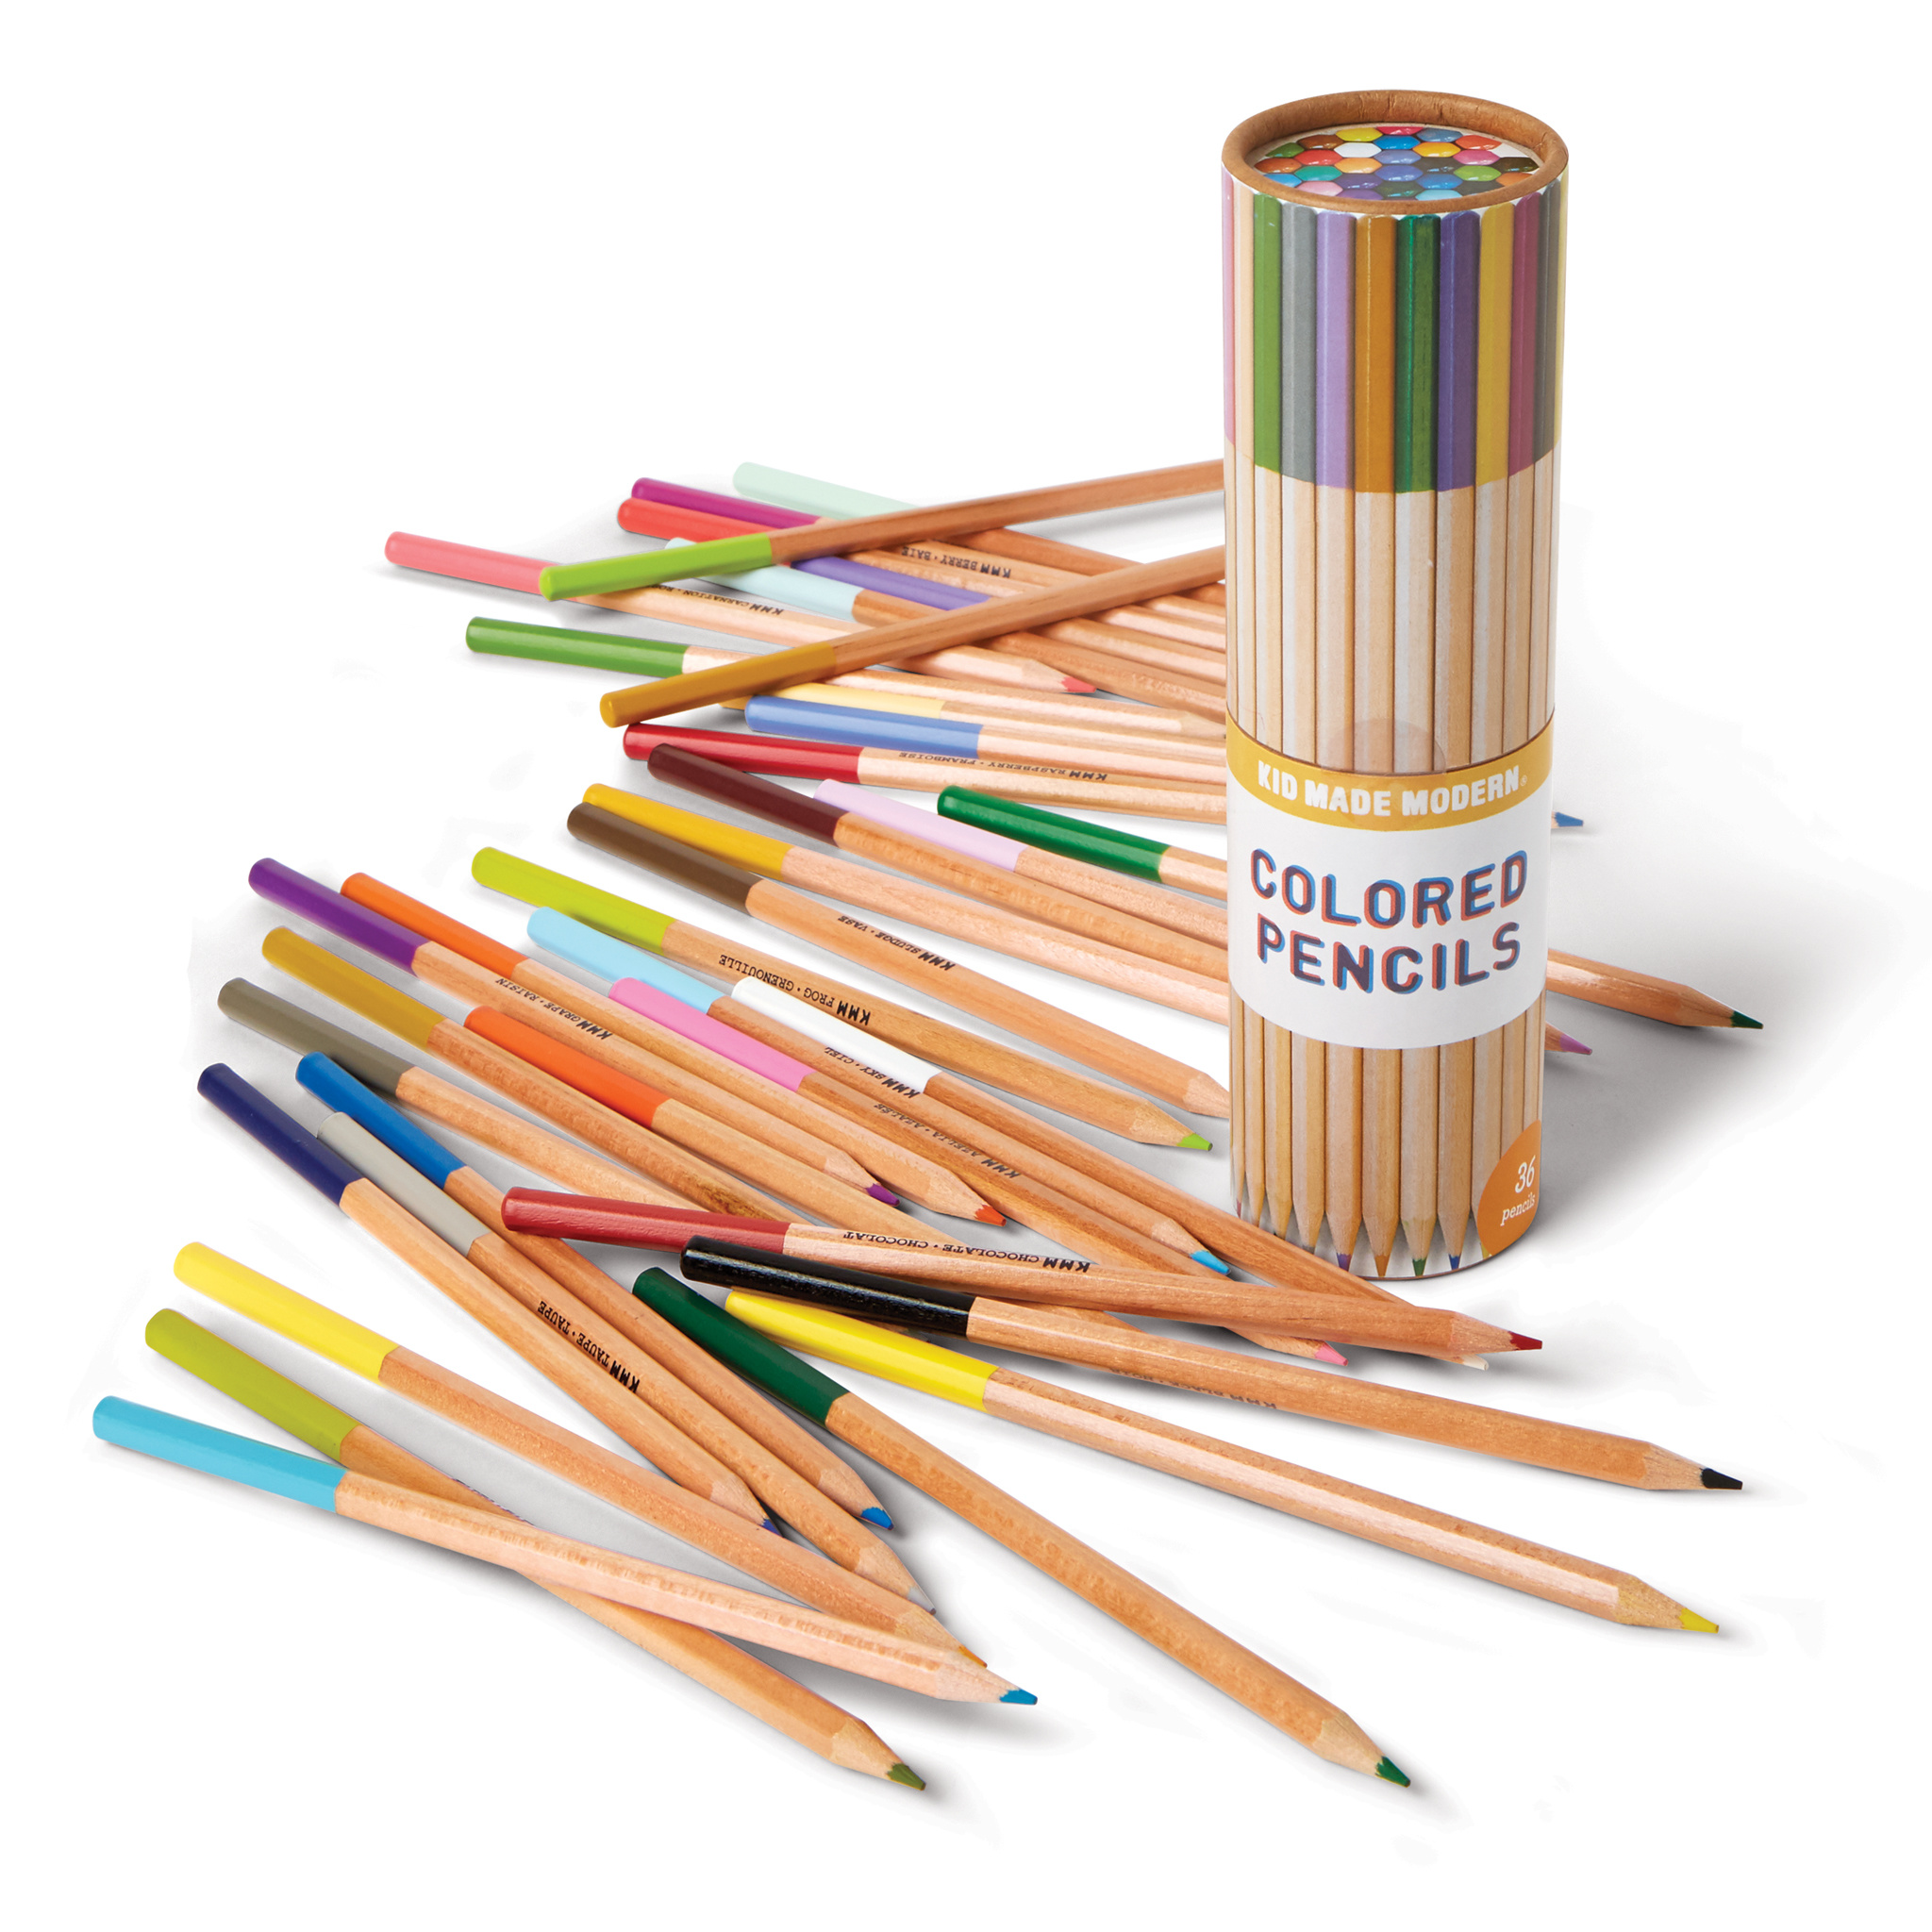 These your pencils. Professional quality colored Pencils. Pencils for artists. Frame from Pencils. Pencil in Colors names.